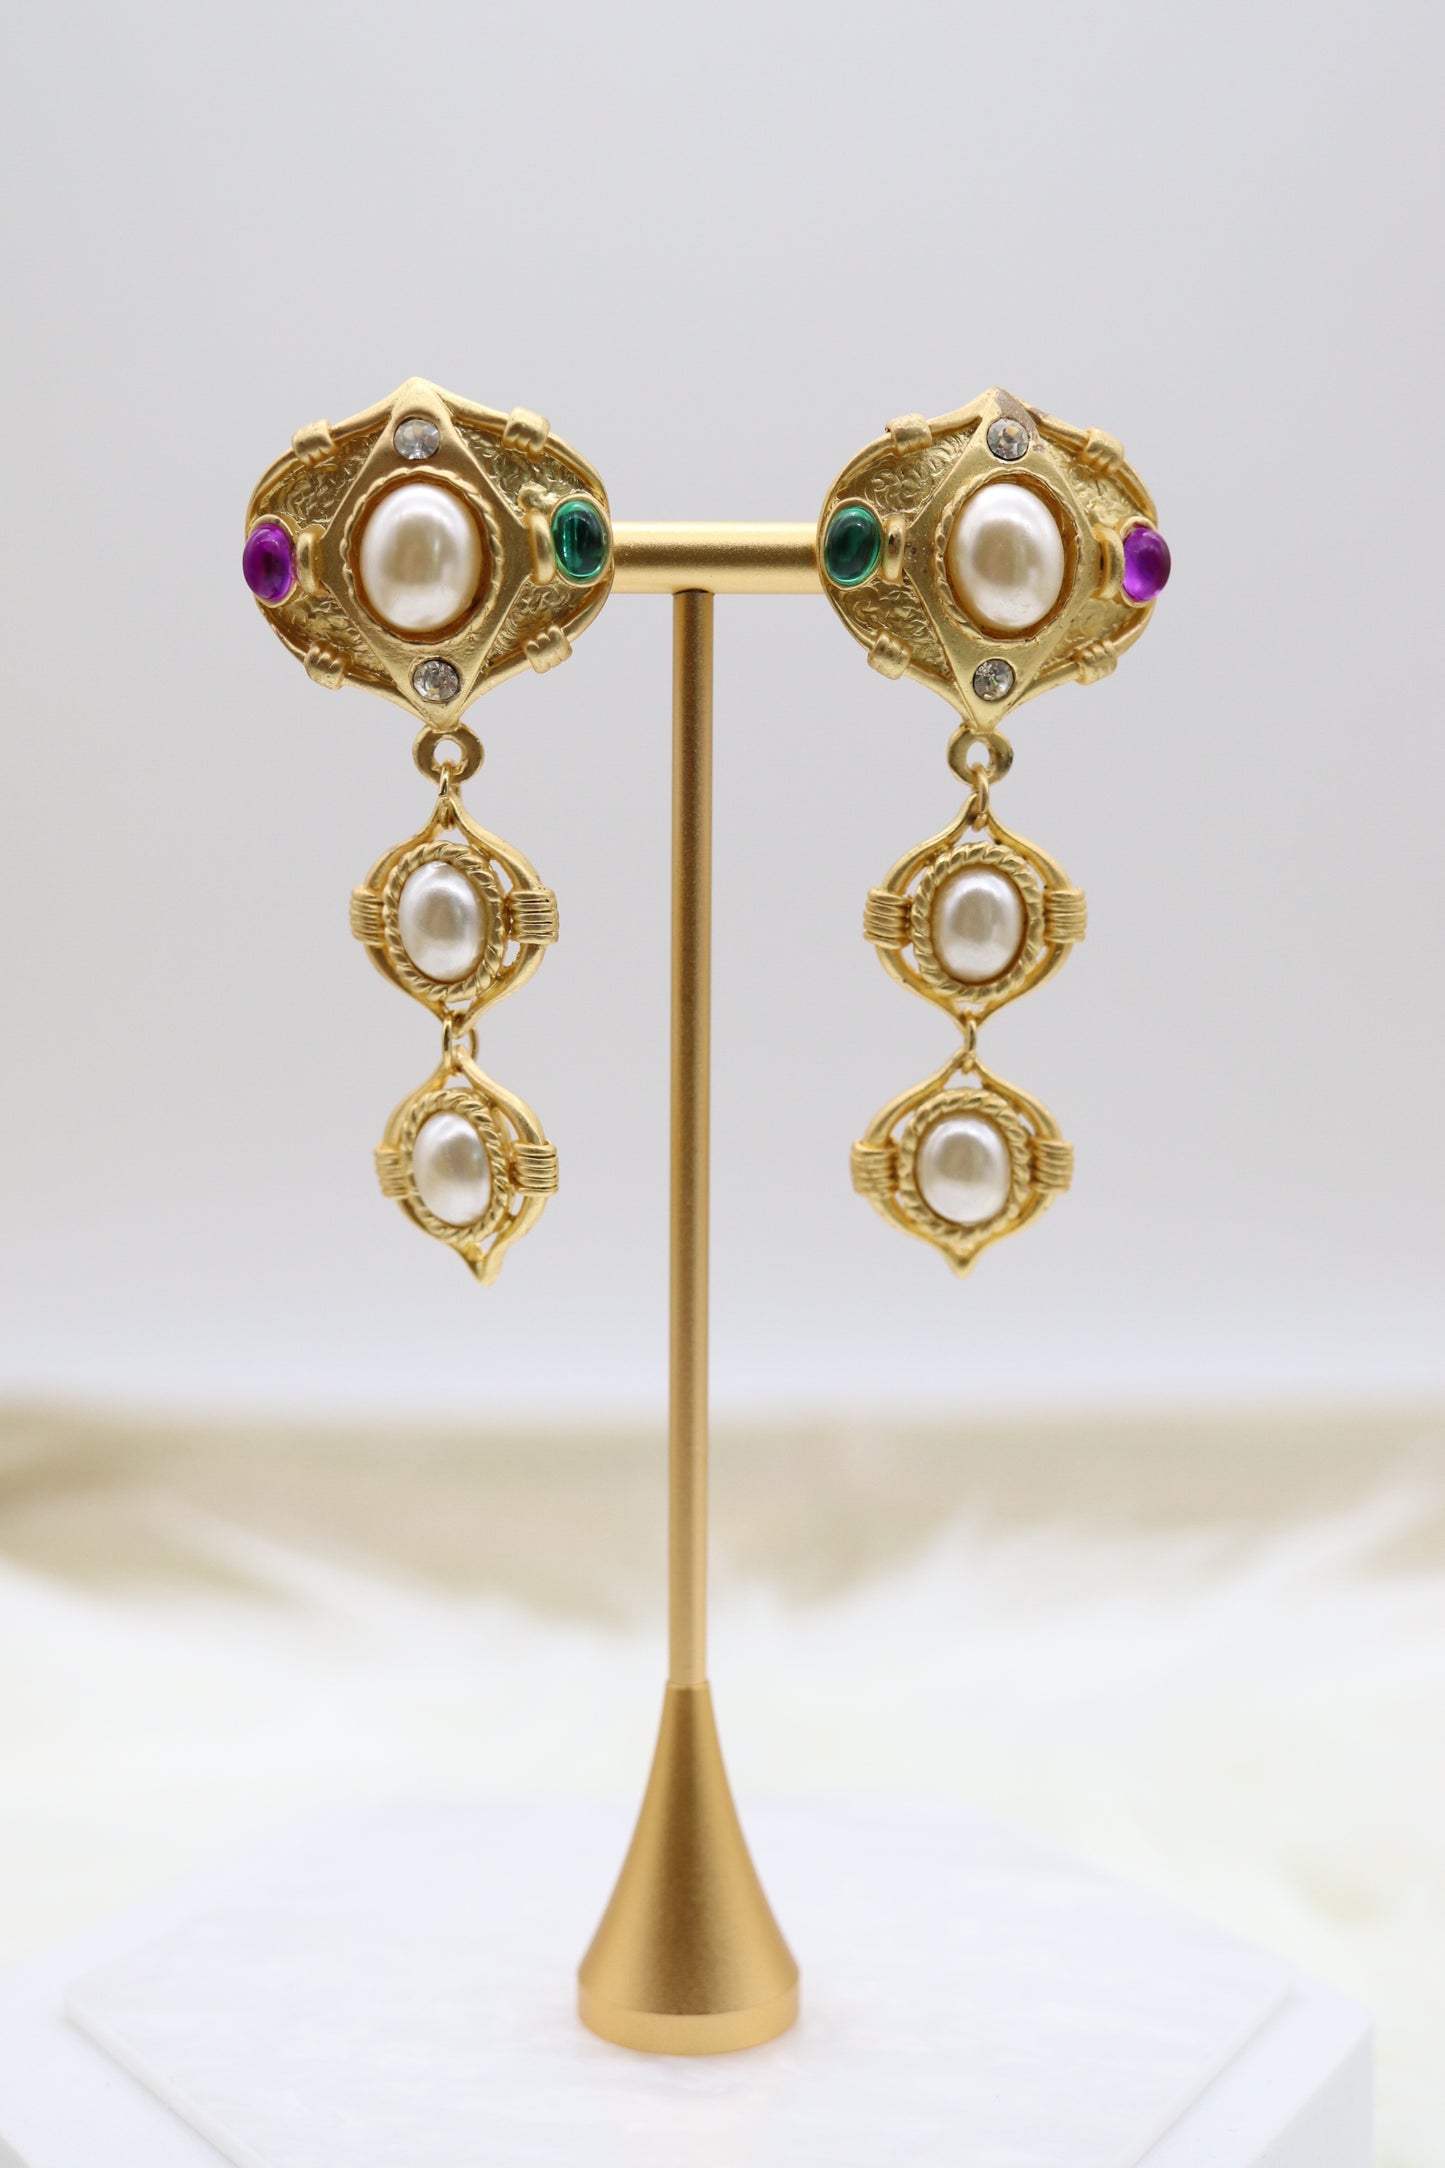 Matte Gold Tiered Drop Clip-On Earrings with Multi-Colored Stones